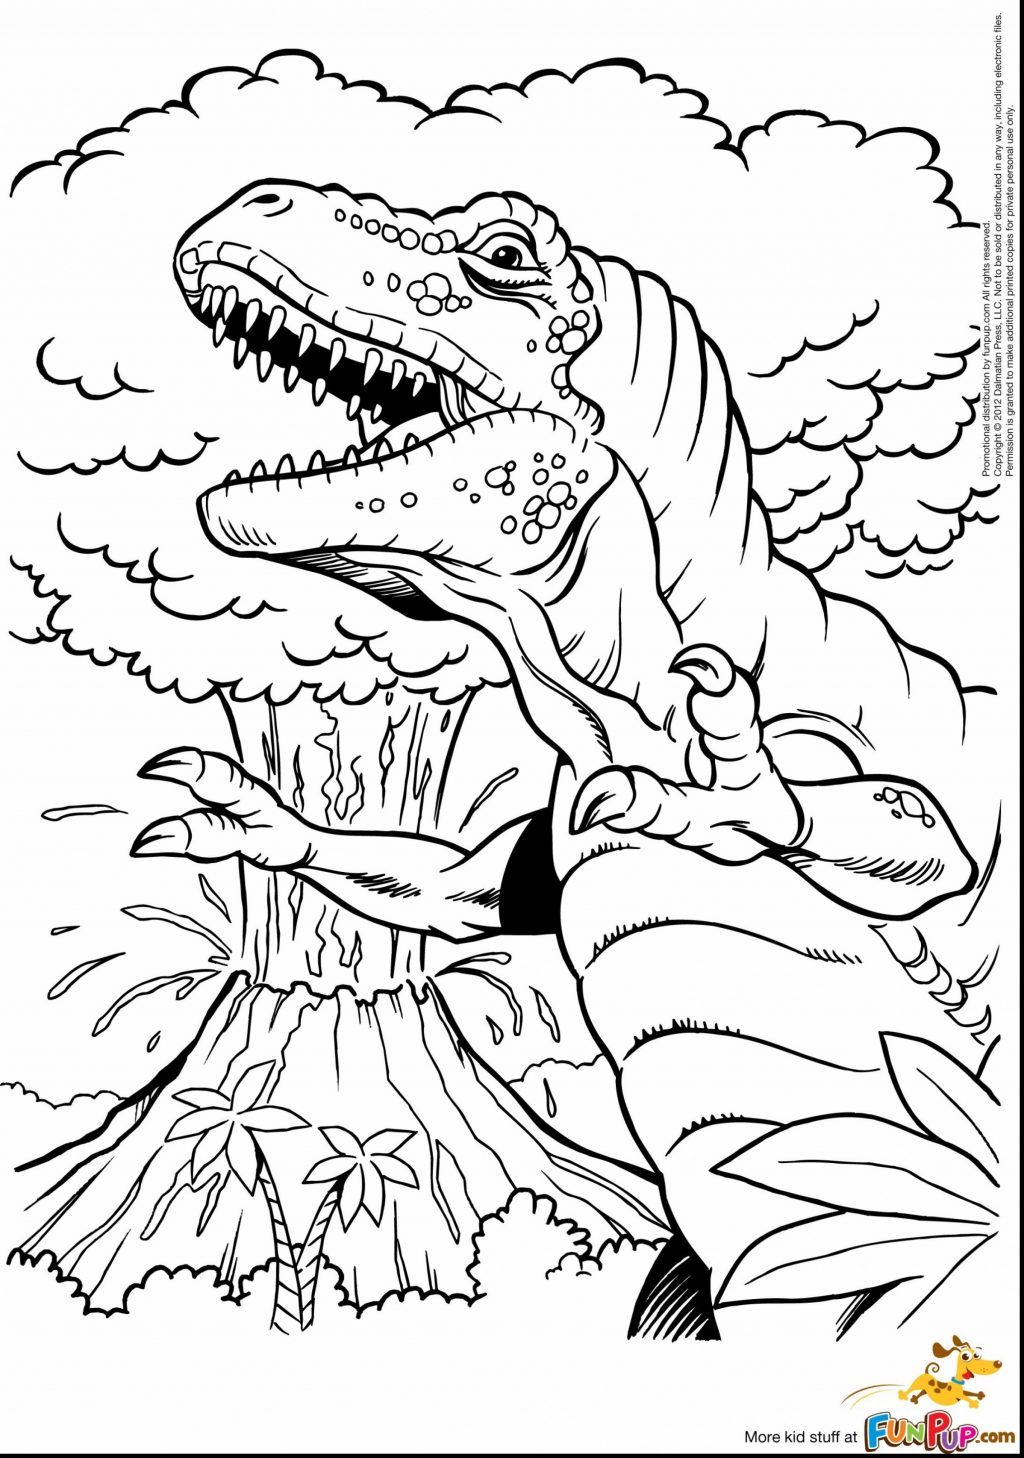 Dinosaurus Coloring Pages   Coloring Home